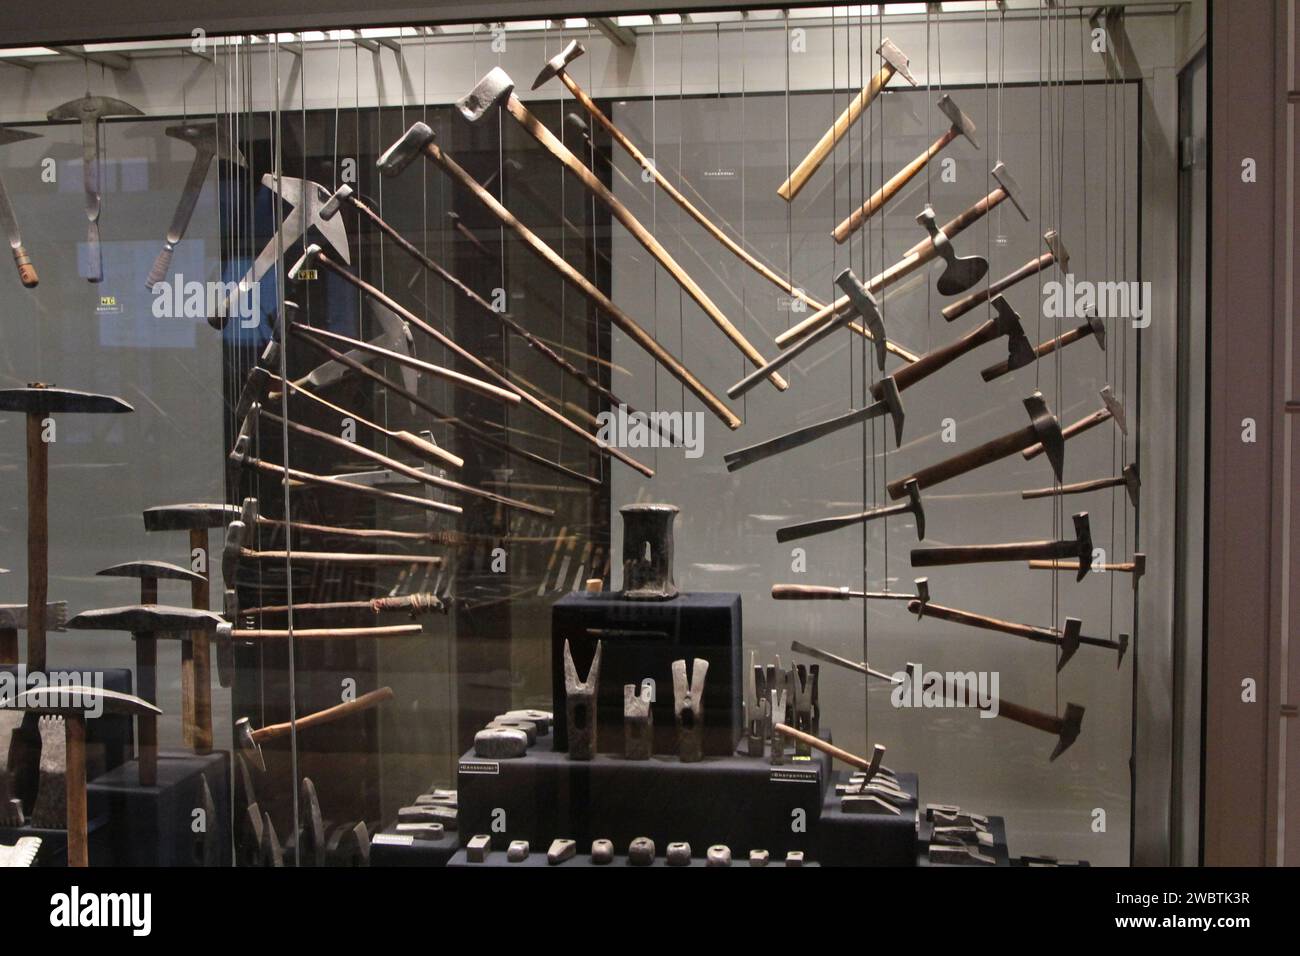 The way these hammers are displayed in the Musée de l'Outil (tool museum) in Troyes, France, reproduces the movement a user of this tool would make. Stock Photo